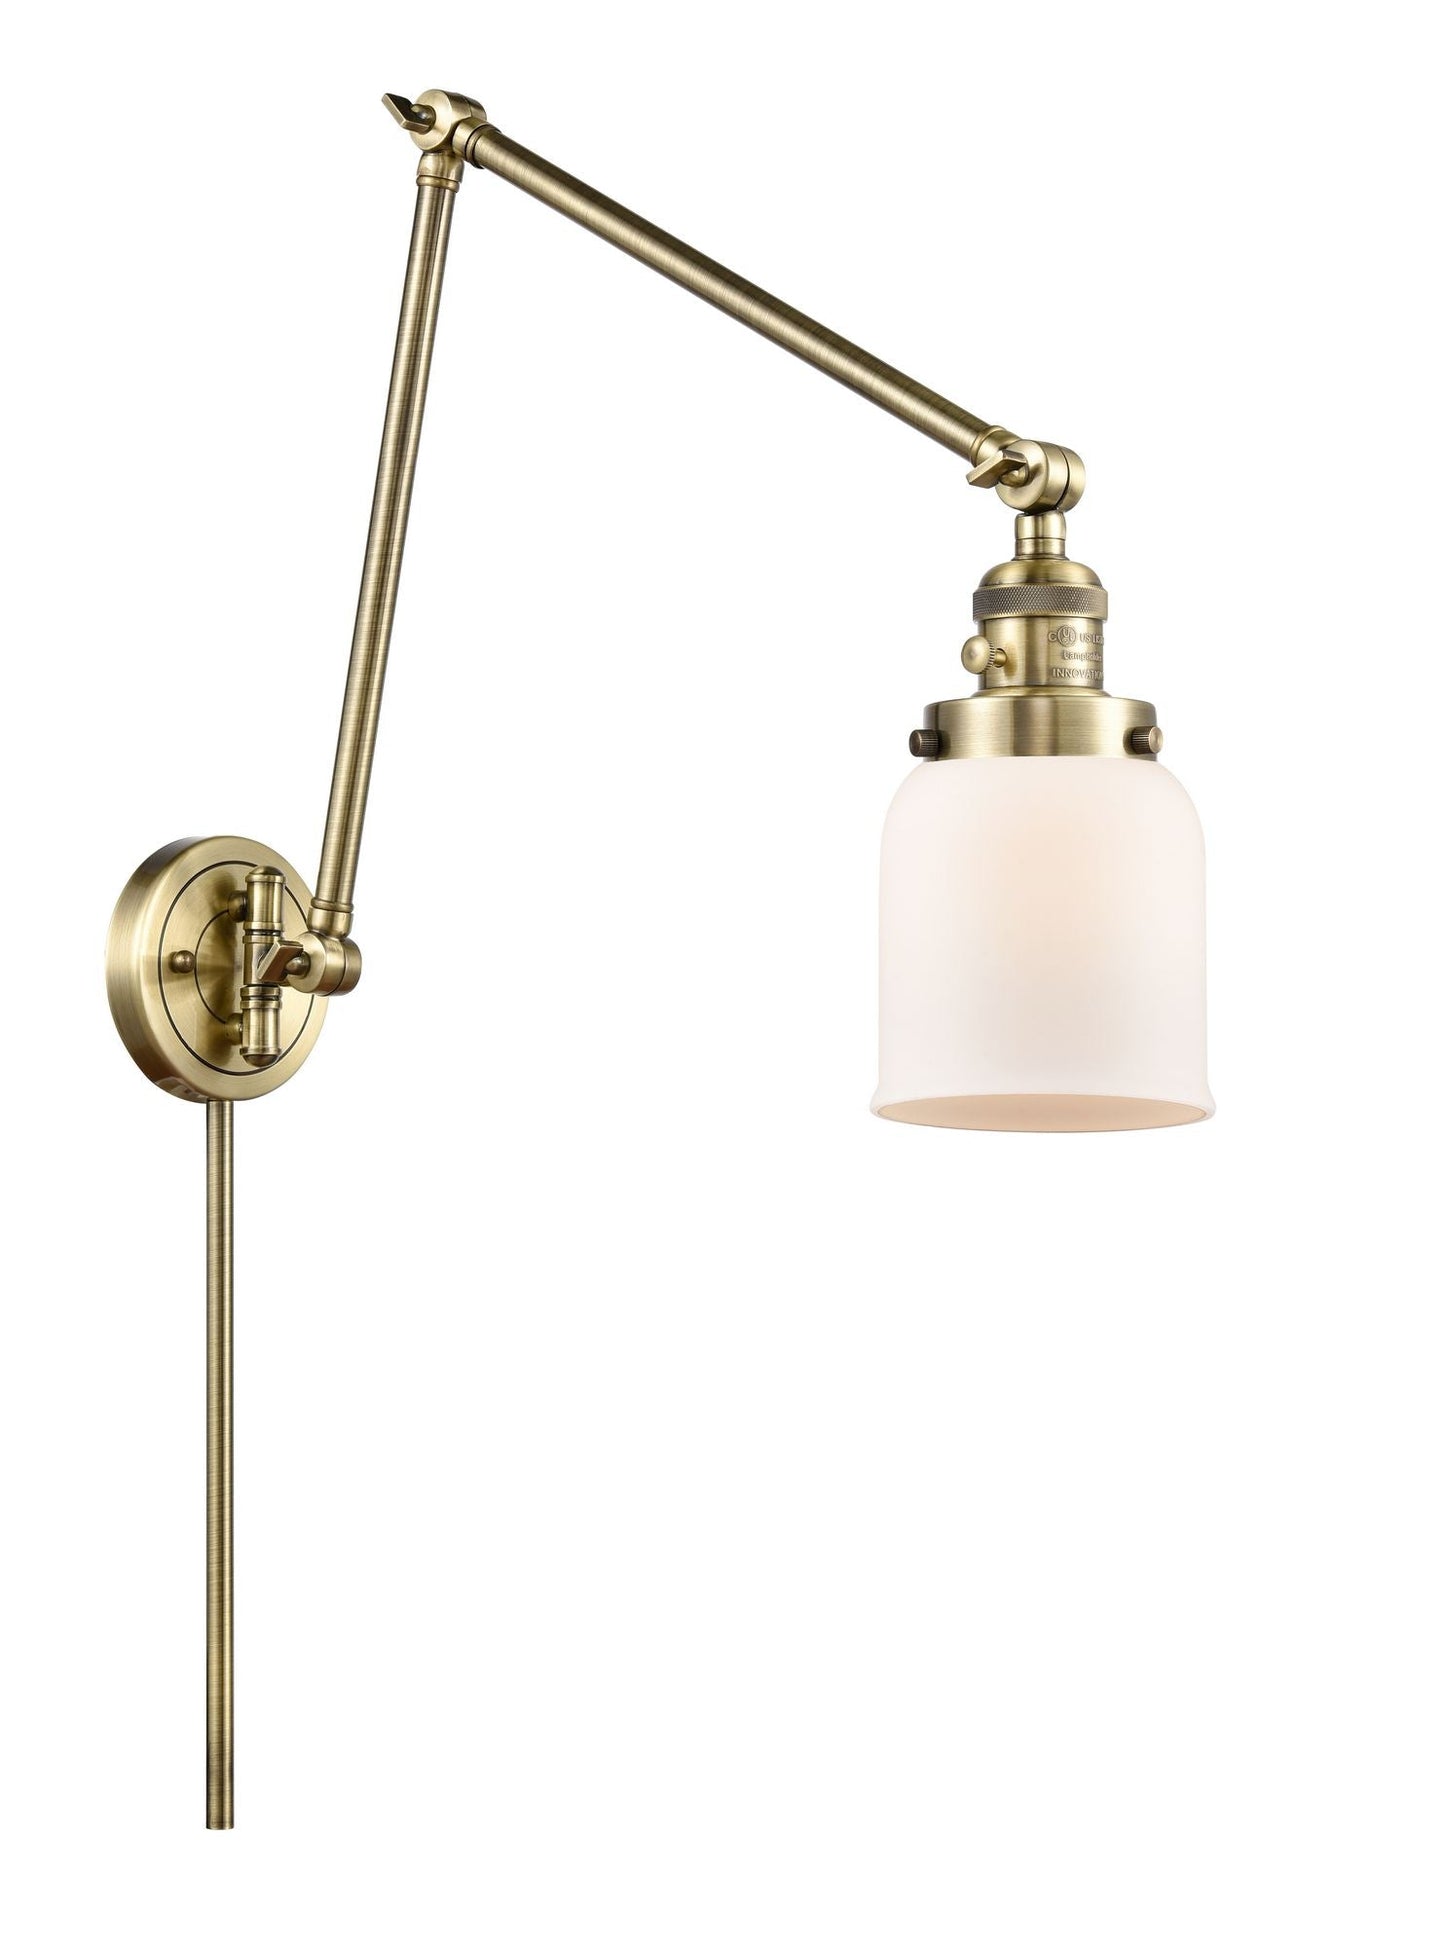 1-Light 8" Bell Swing Arm With Switch - Bell-Urn Matte White Glass - Choice of Finish And Incandesent Or LED Bulbs